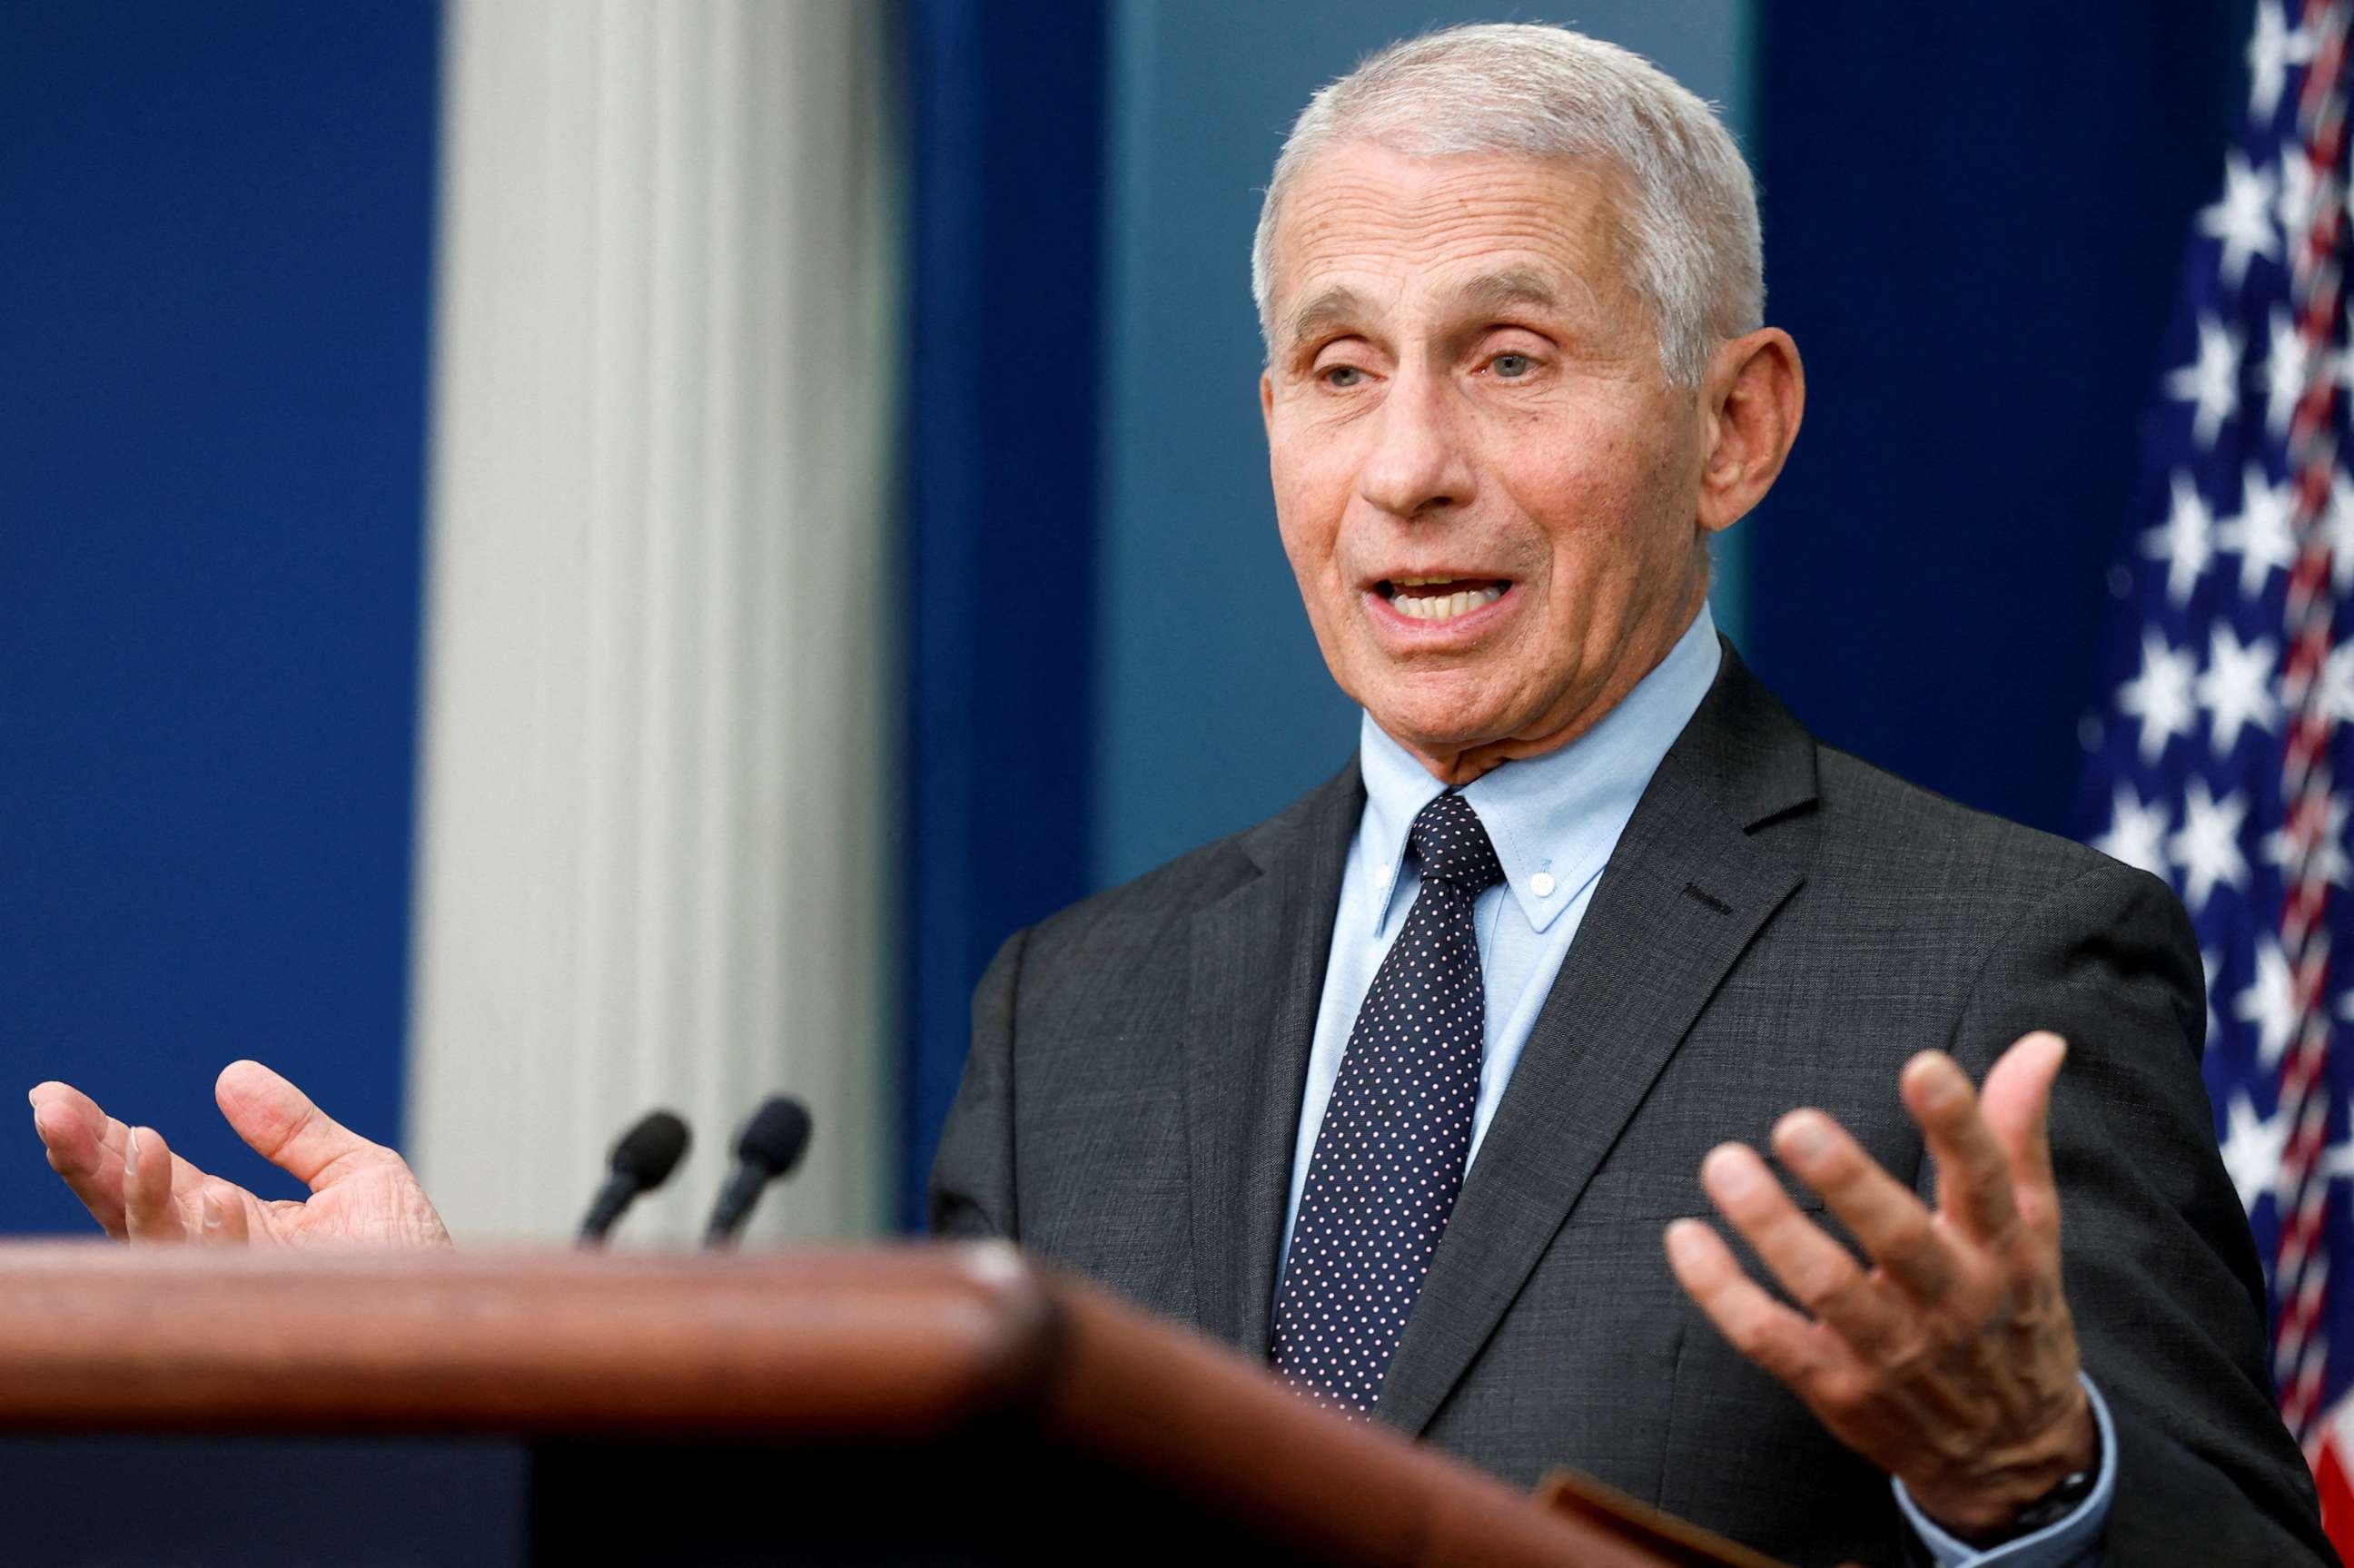 PHOTO: NIH National Institute of Allergy and Infectious Diseases Director Anthony Fauci joins White House Press Secretary Karine Jean-Pierre for the daily press briefing at the White House, Nov. 22, 2022.